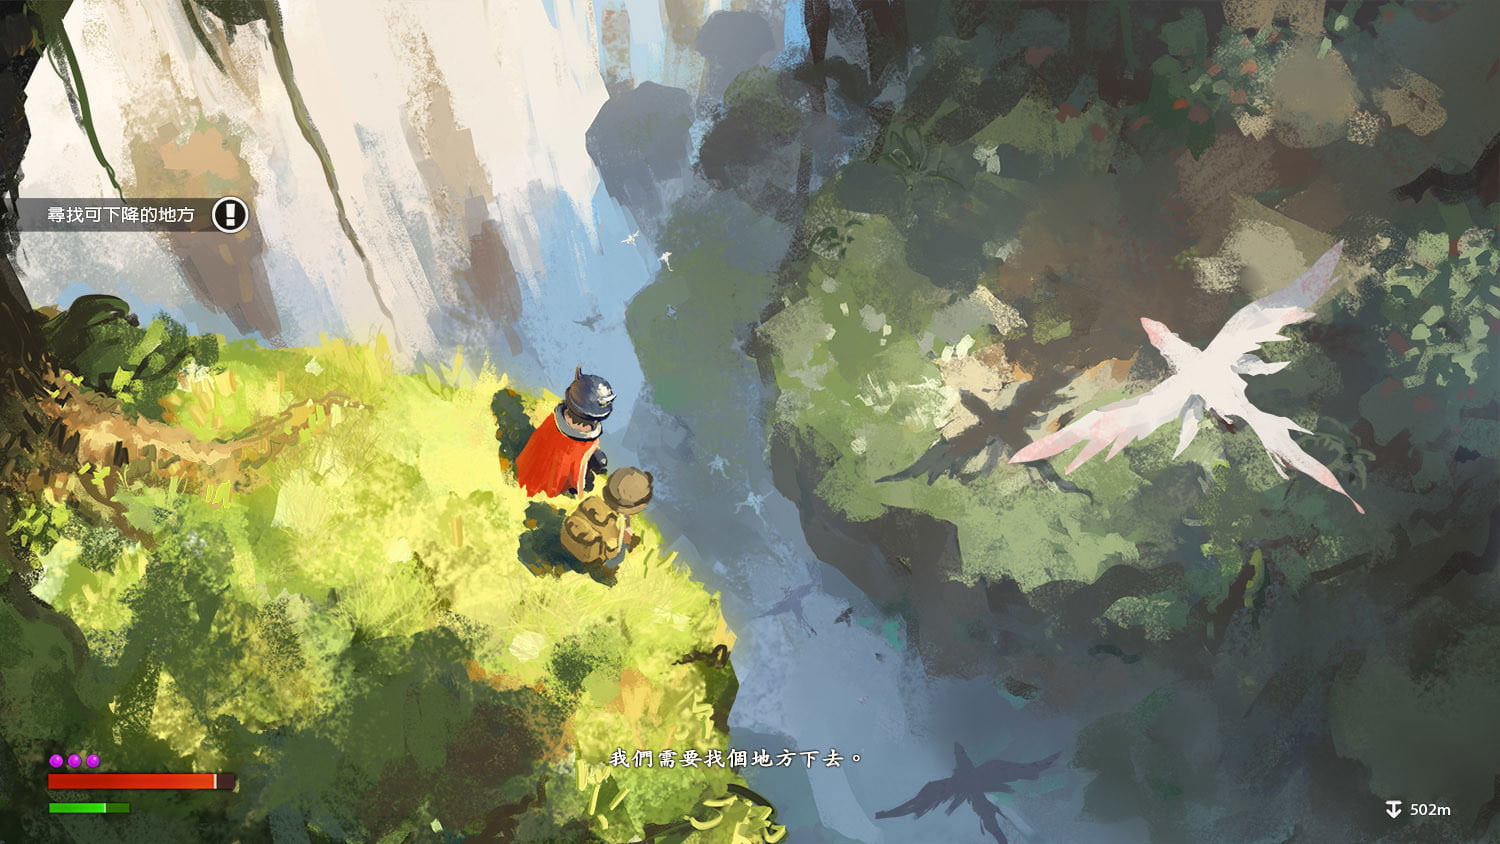 Wallpaper Made In Abyss, Anime Boys, Hud, Video Game Art